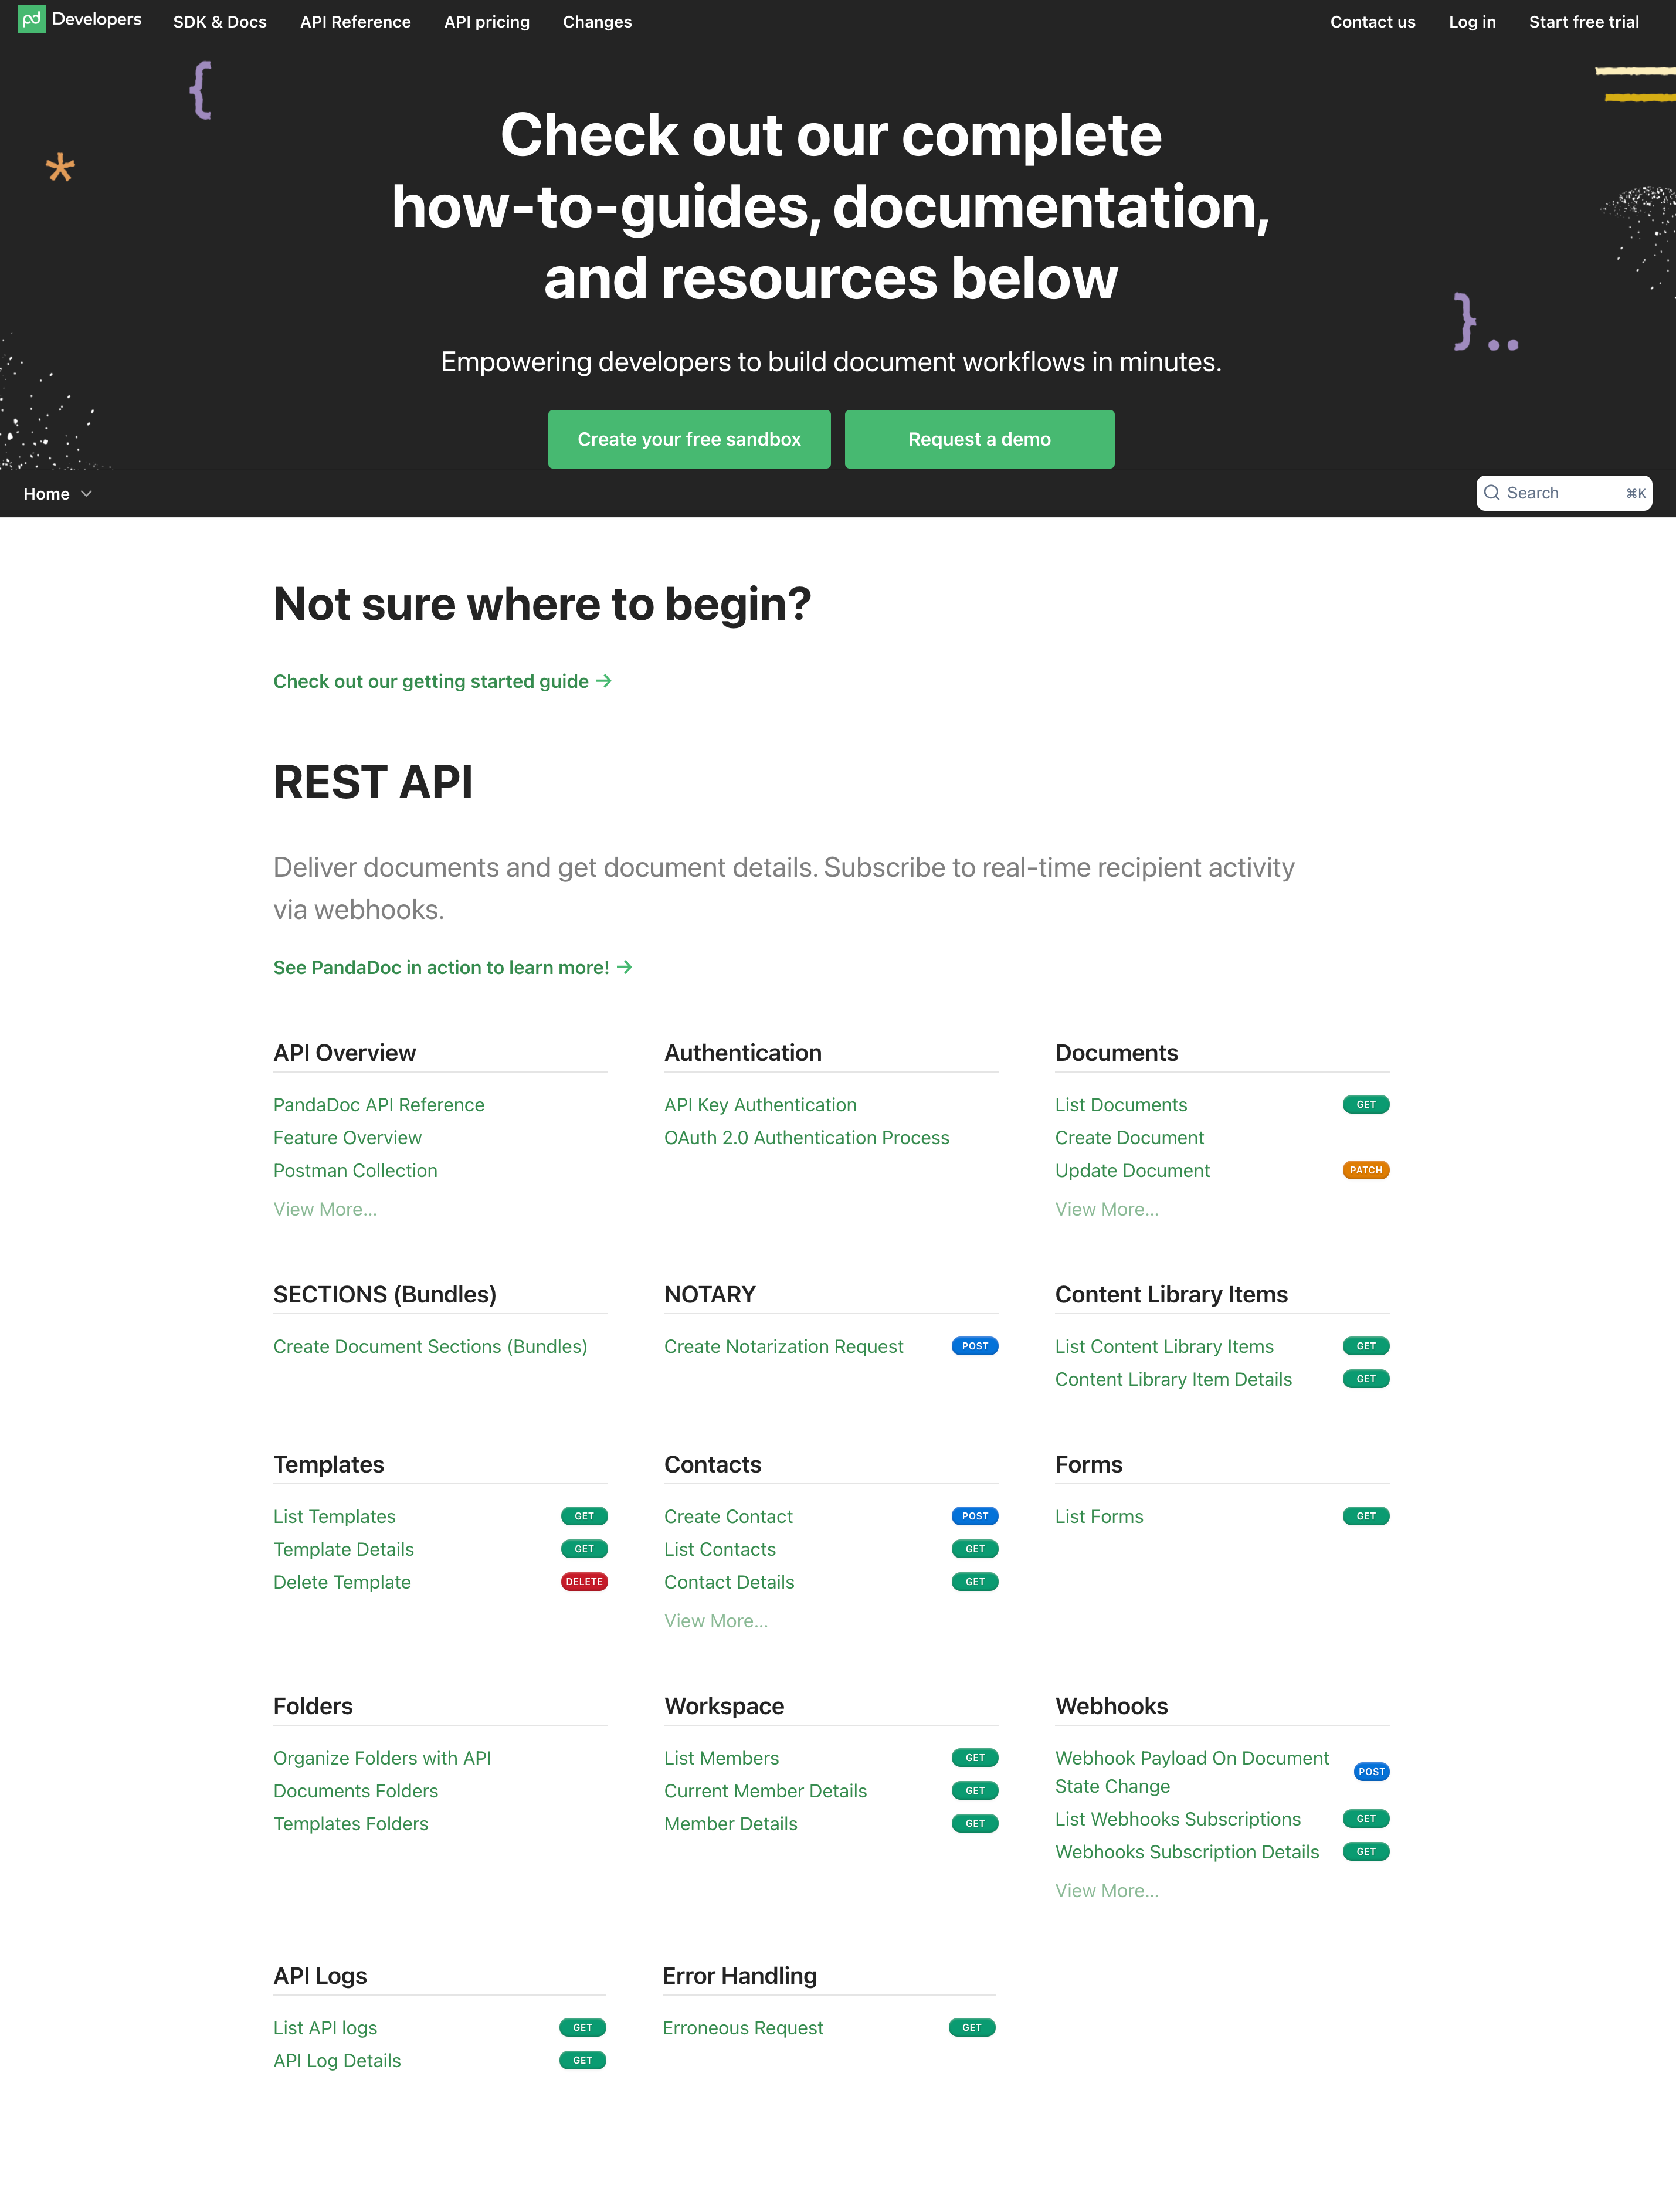 PandaDoc's homepage. The text says 'Not sure where to begin?' and then, they list the REST APIs.